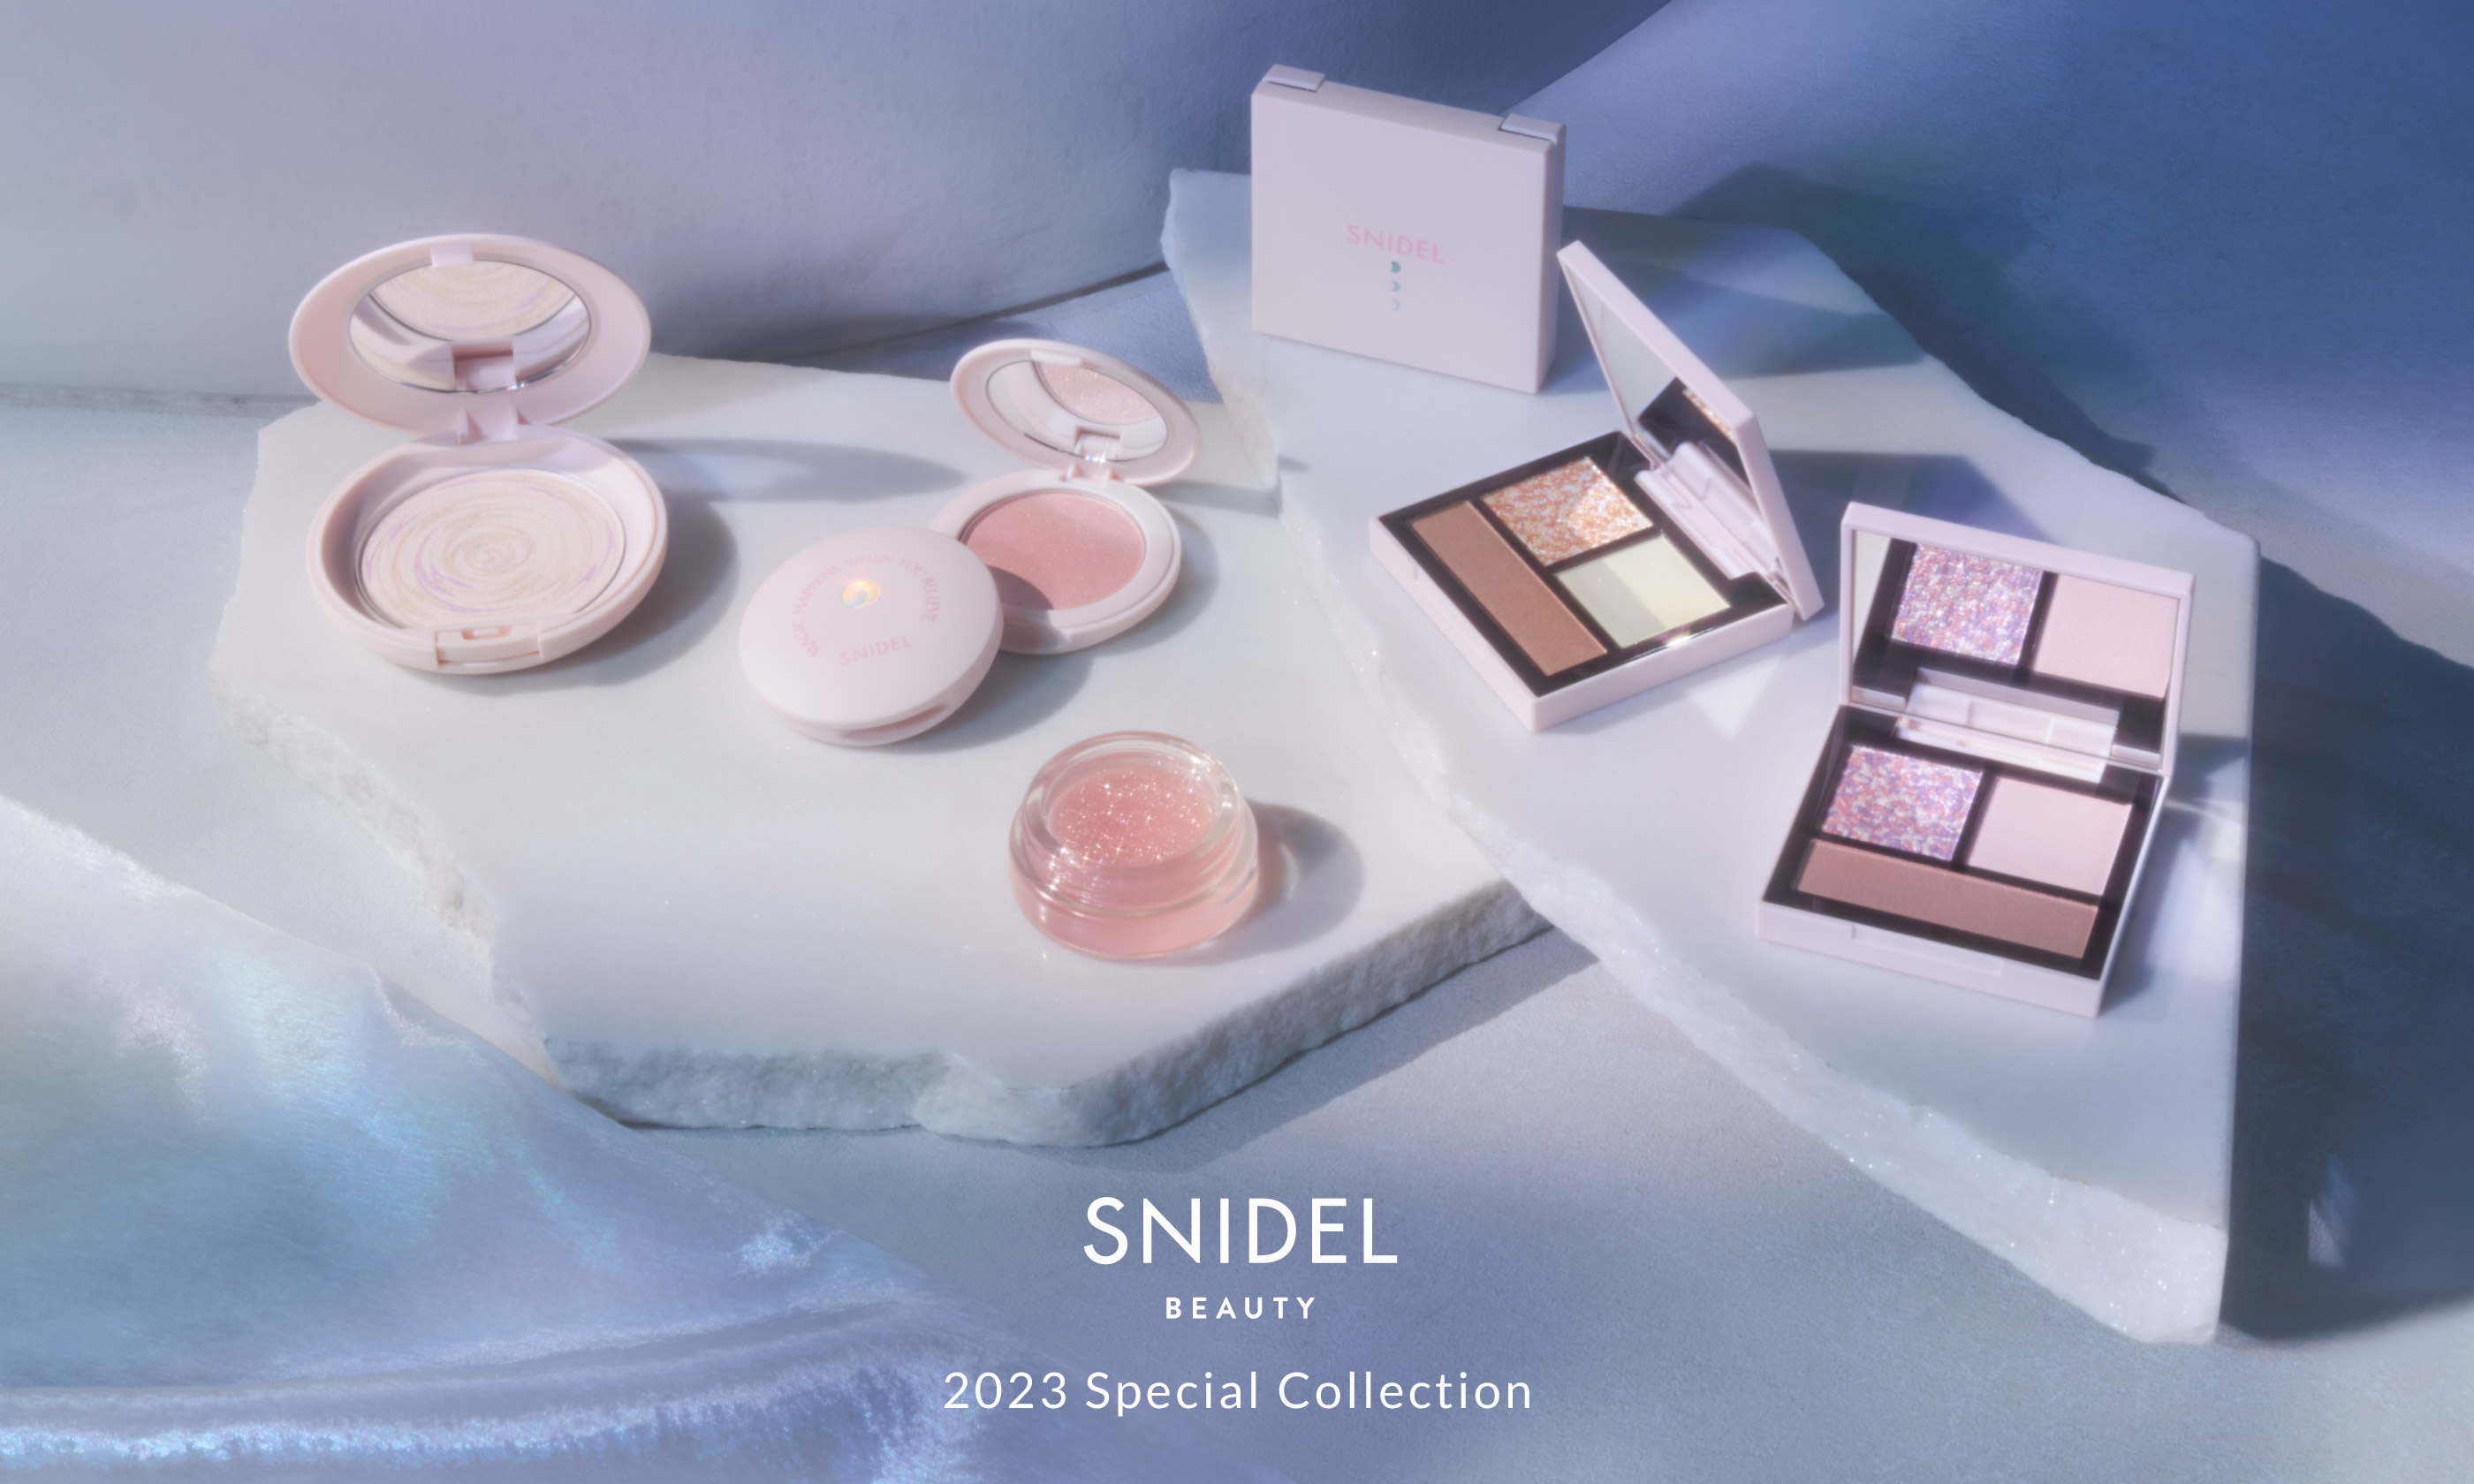 SNIDEL BEAUTY 2023 Special Collection